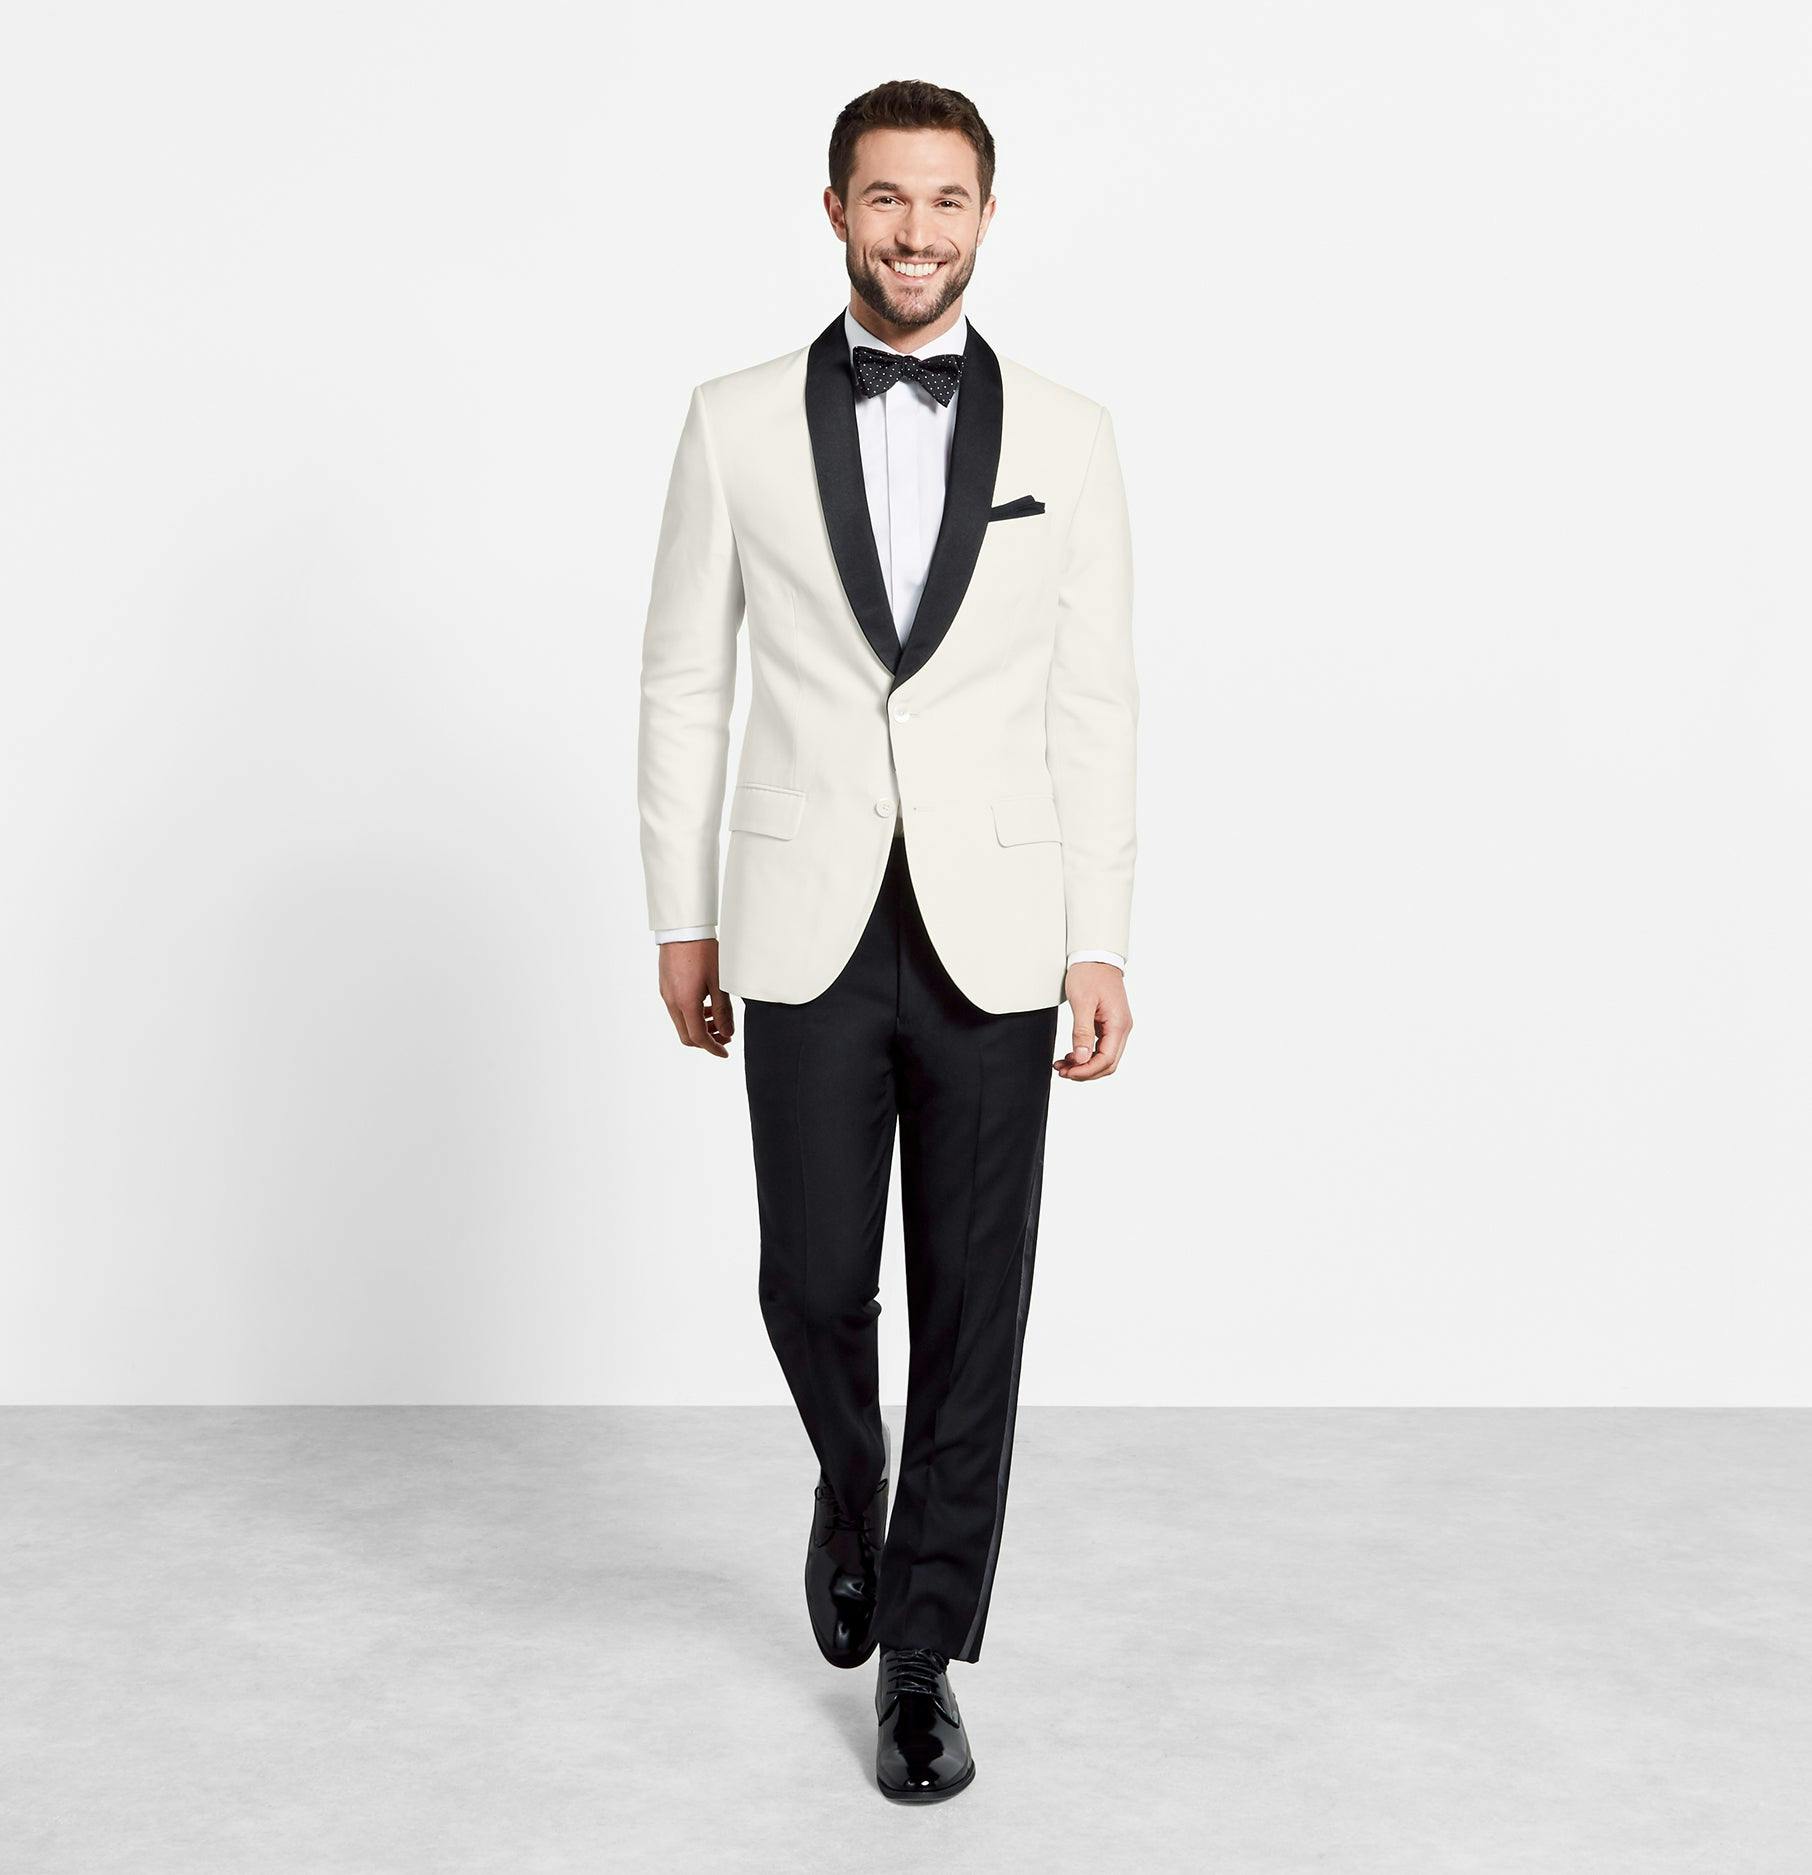 The white dinner jacket with black lapels is a classic look. Originally a warm weather alternative to the black tuxedo, these days a contrast shawl tux keeps its cool in any climate. Includes jacket and pants. Pants are available in classic and slim fits.